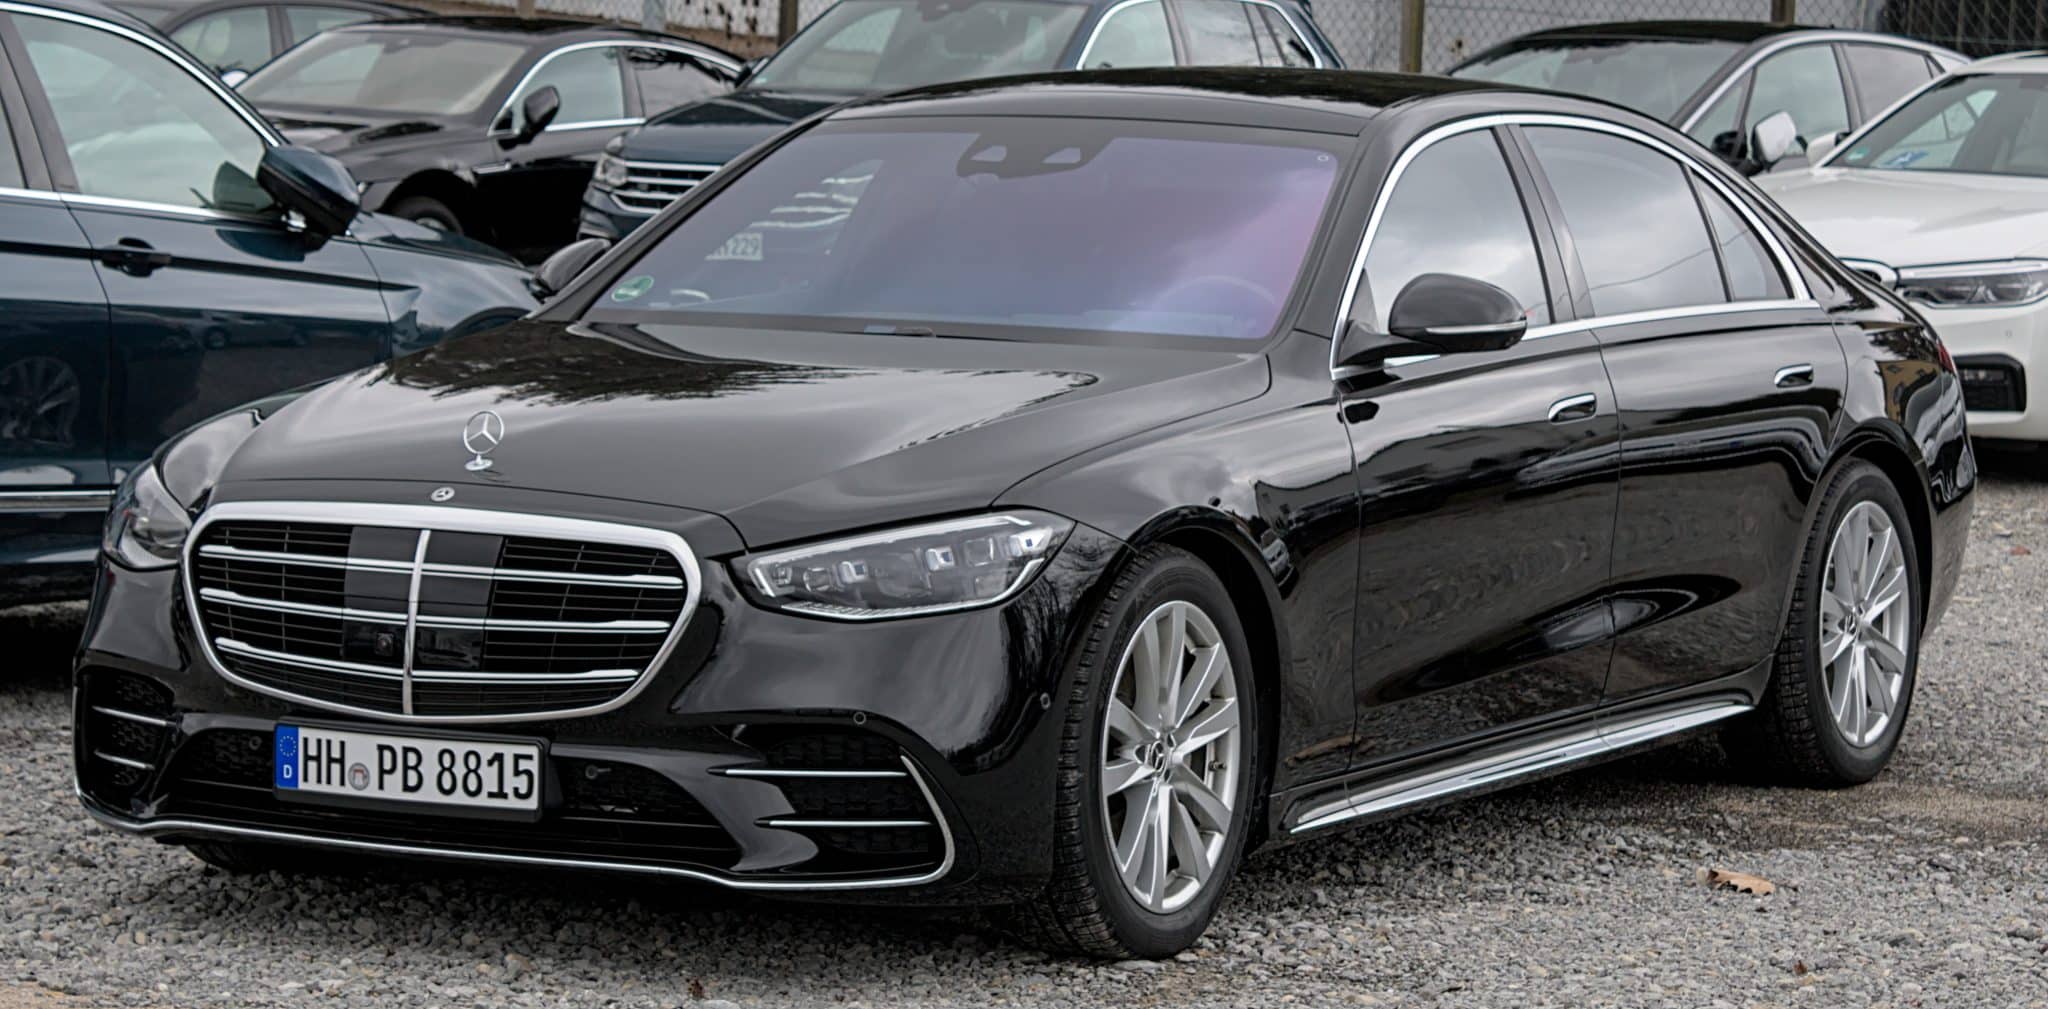 MERCEDES BENZ S 500 COUPE 4MATIC ▶ Impuesto Vehicular ≫